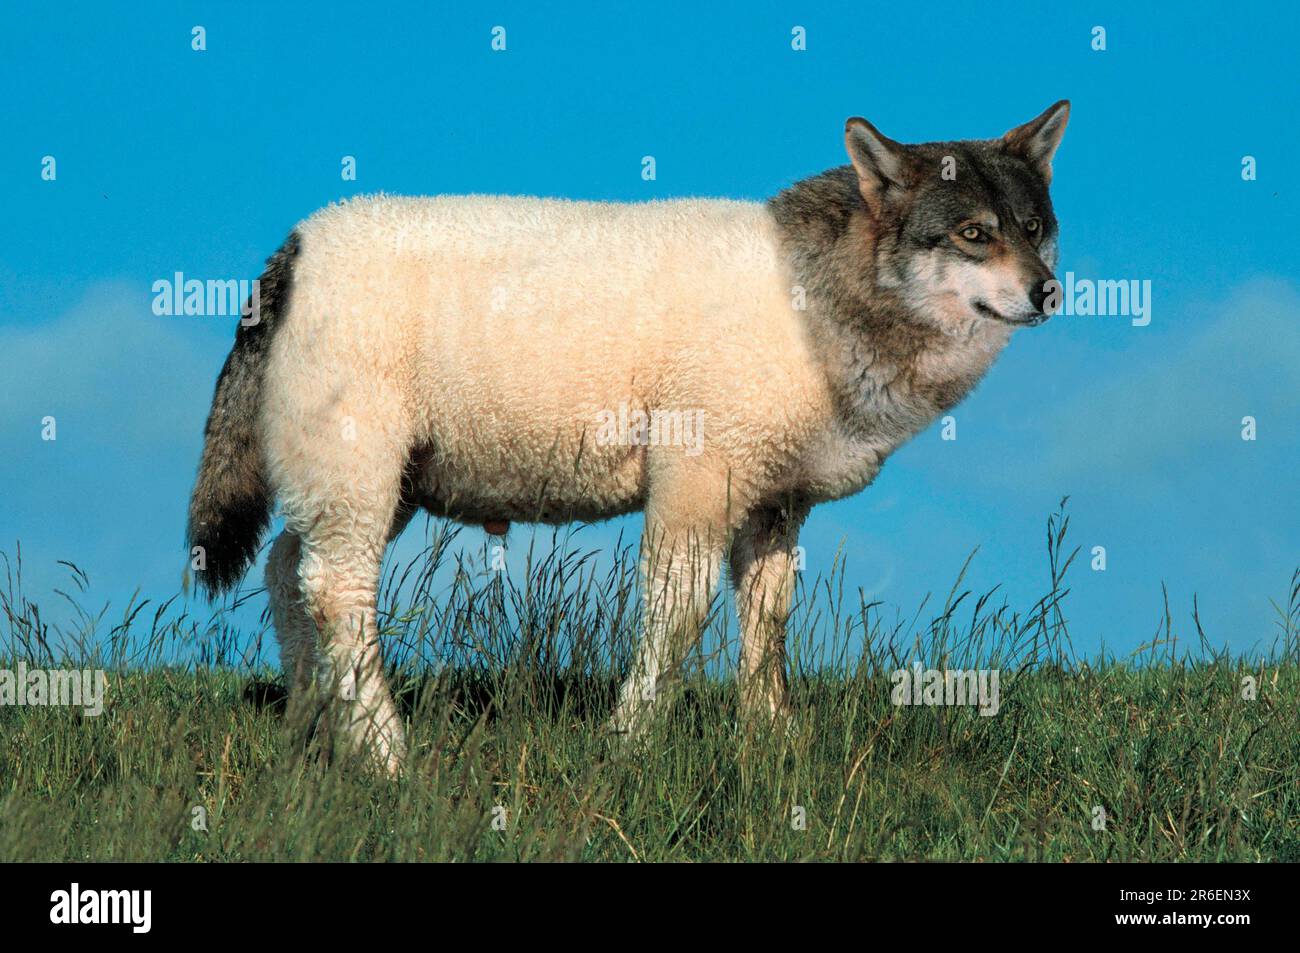 Wolf in sheep's clothing, mythical creature, sideways Stock Photo